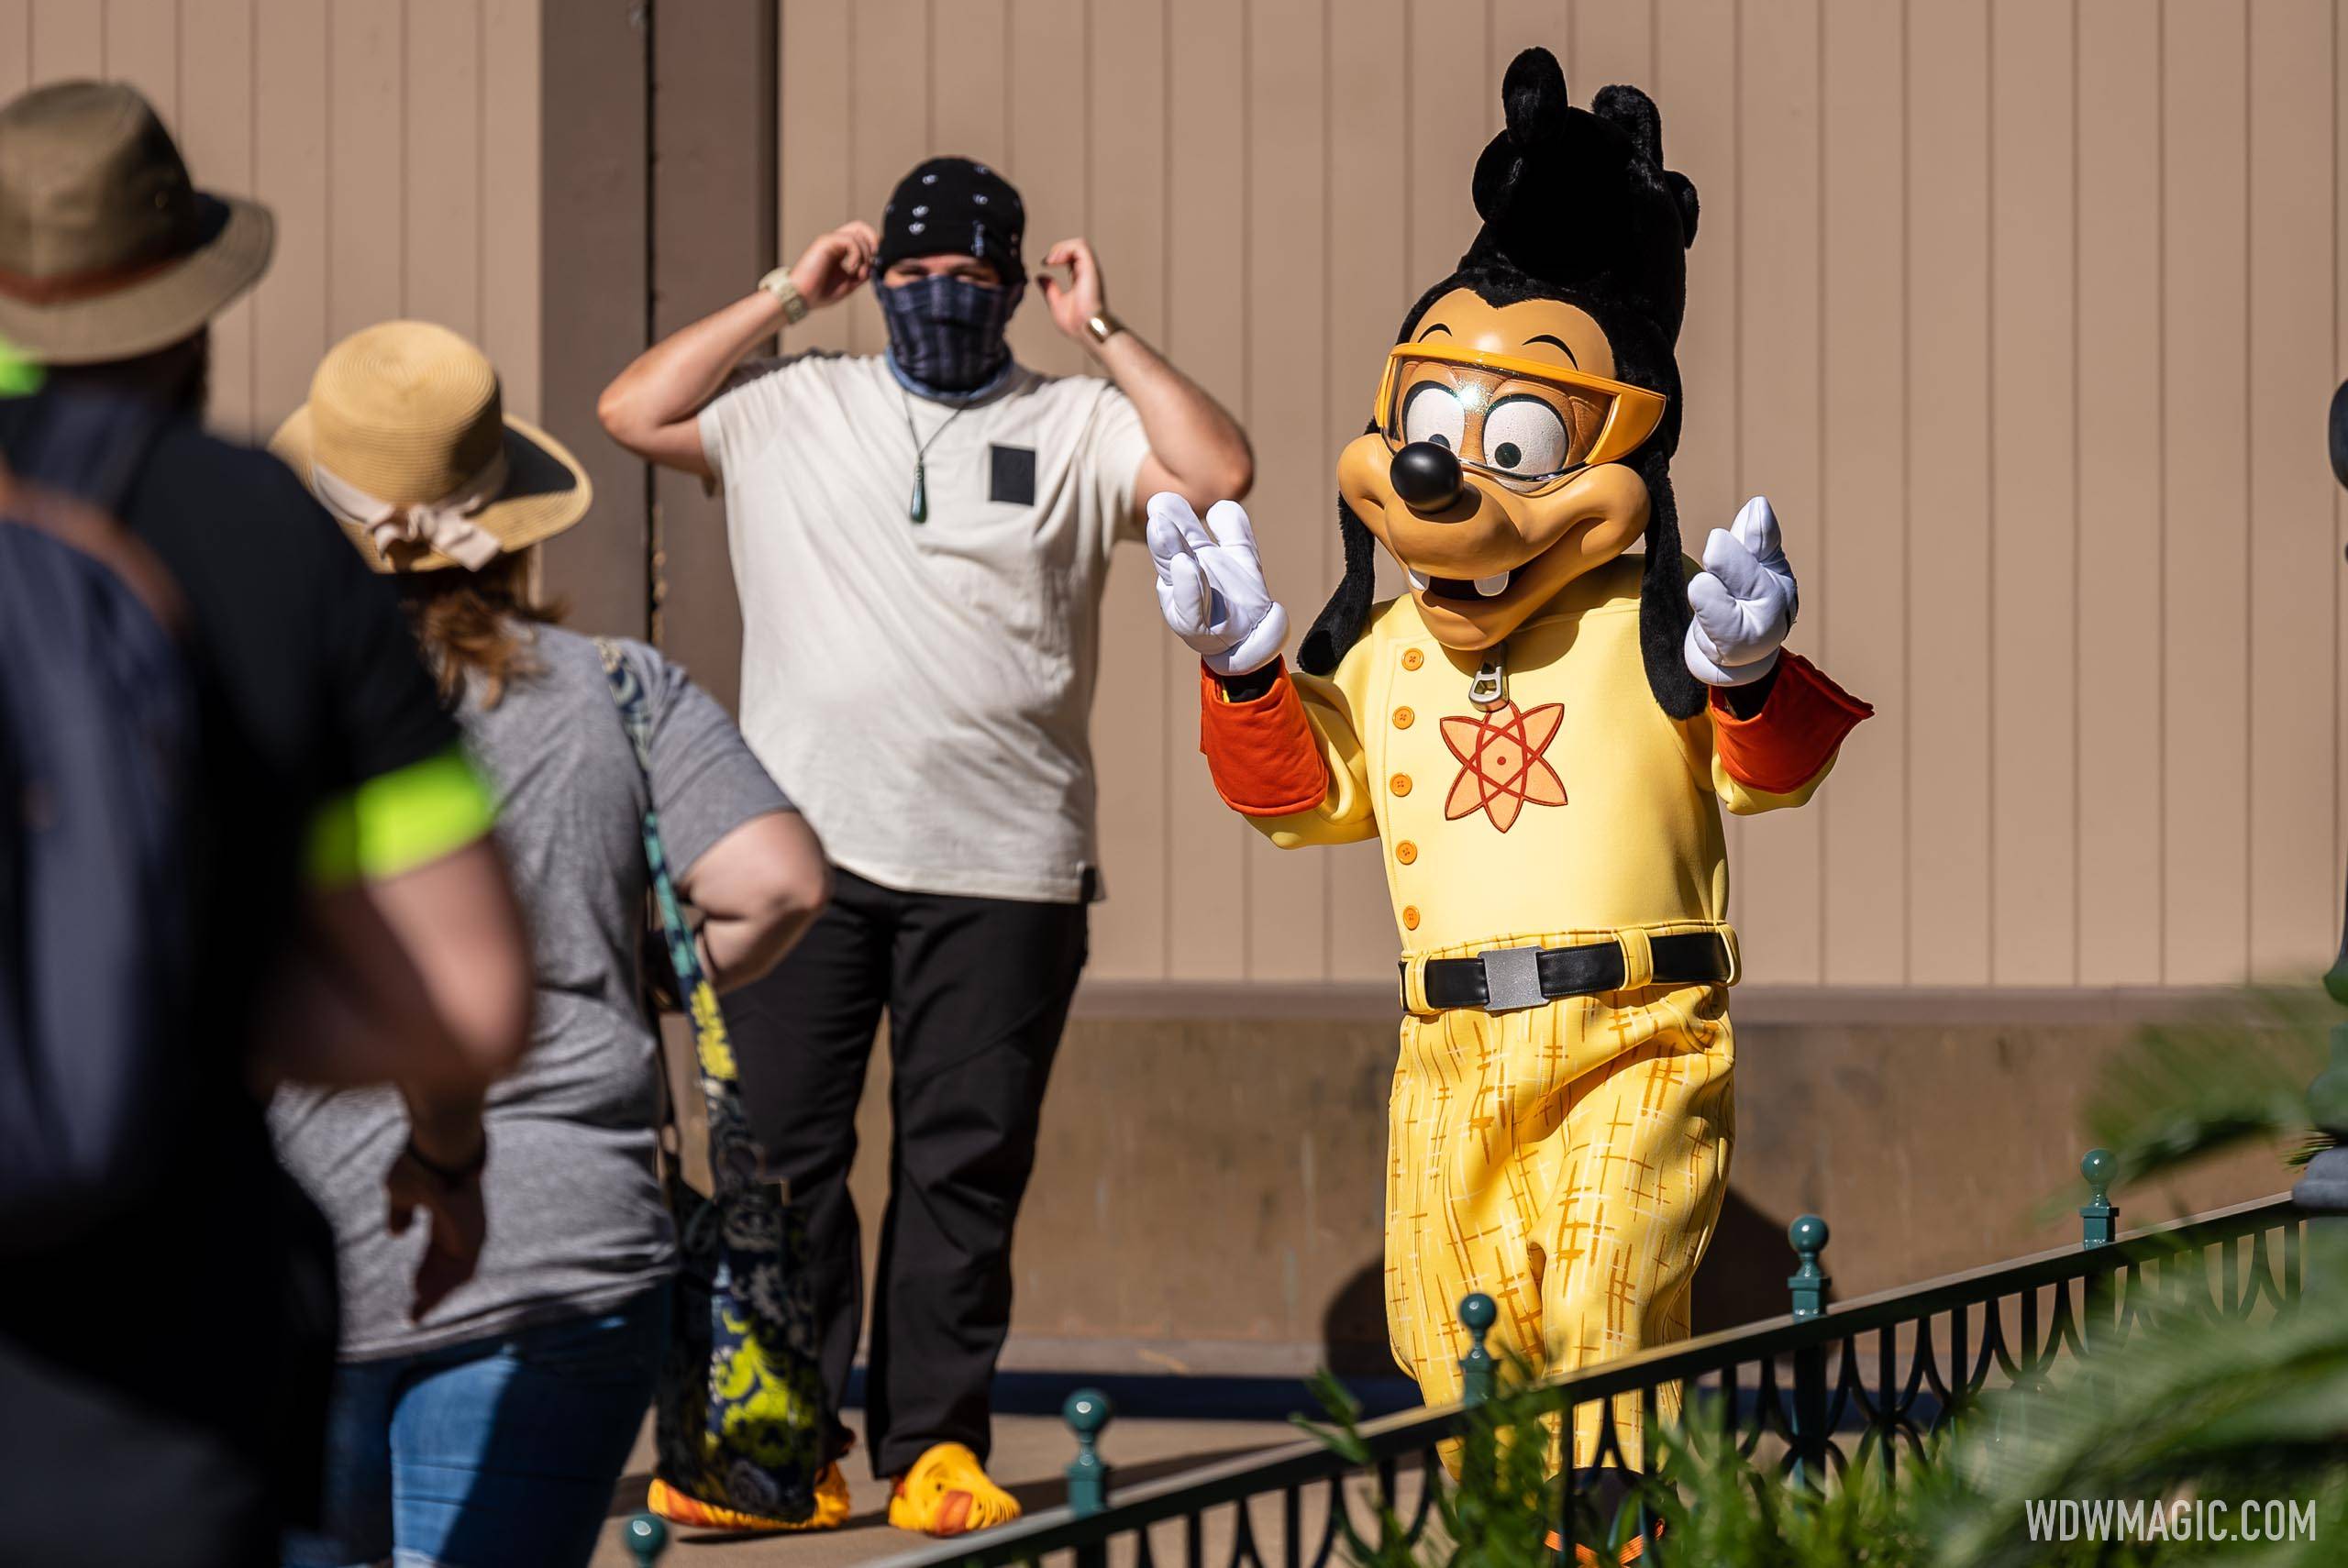 Max as Powerline meeting guests on Grand Avenue